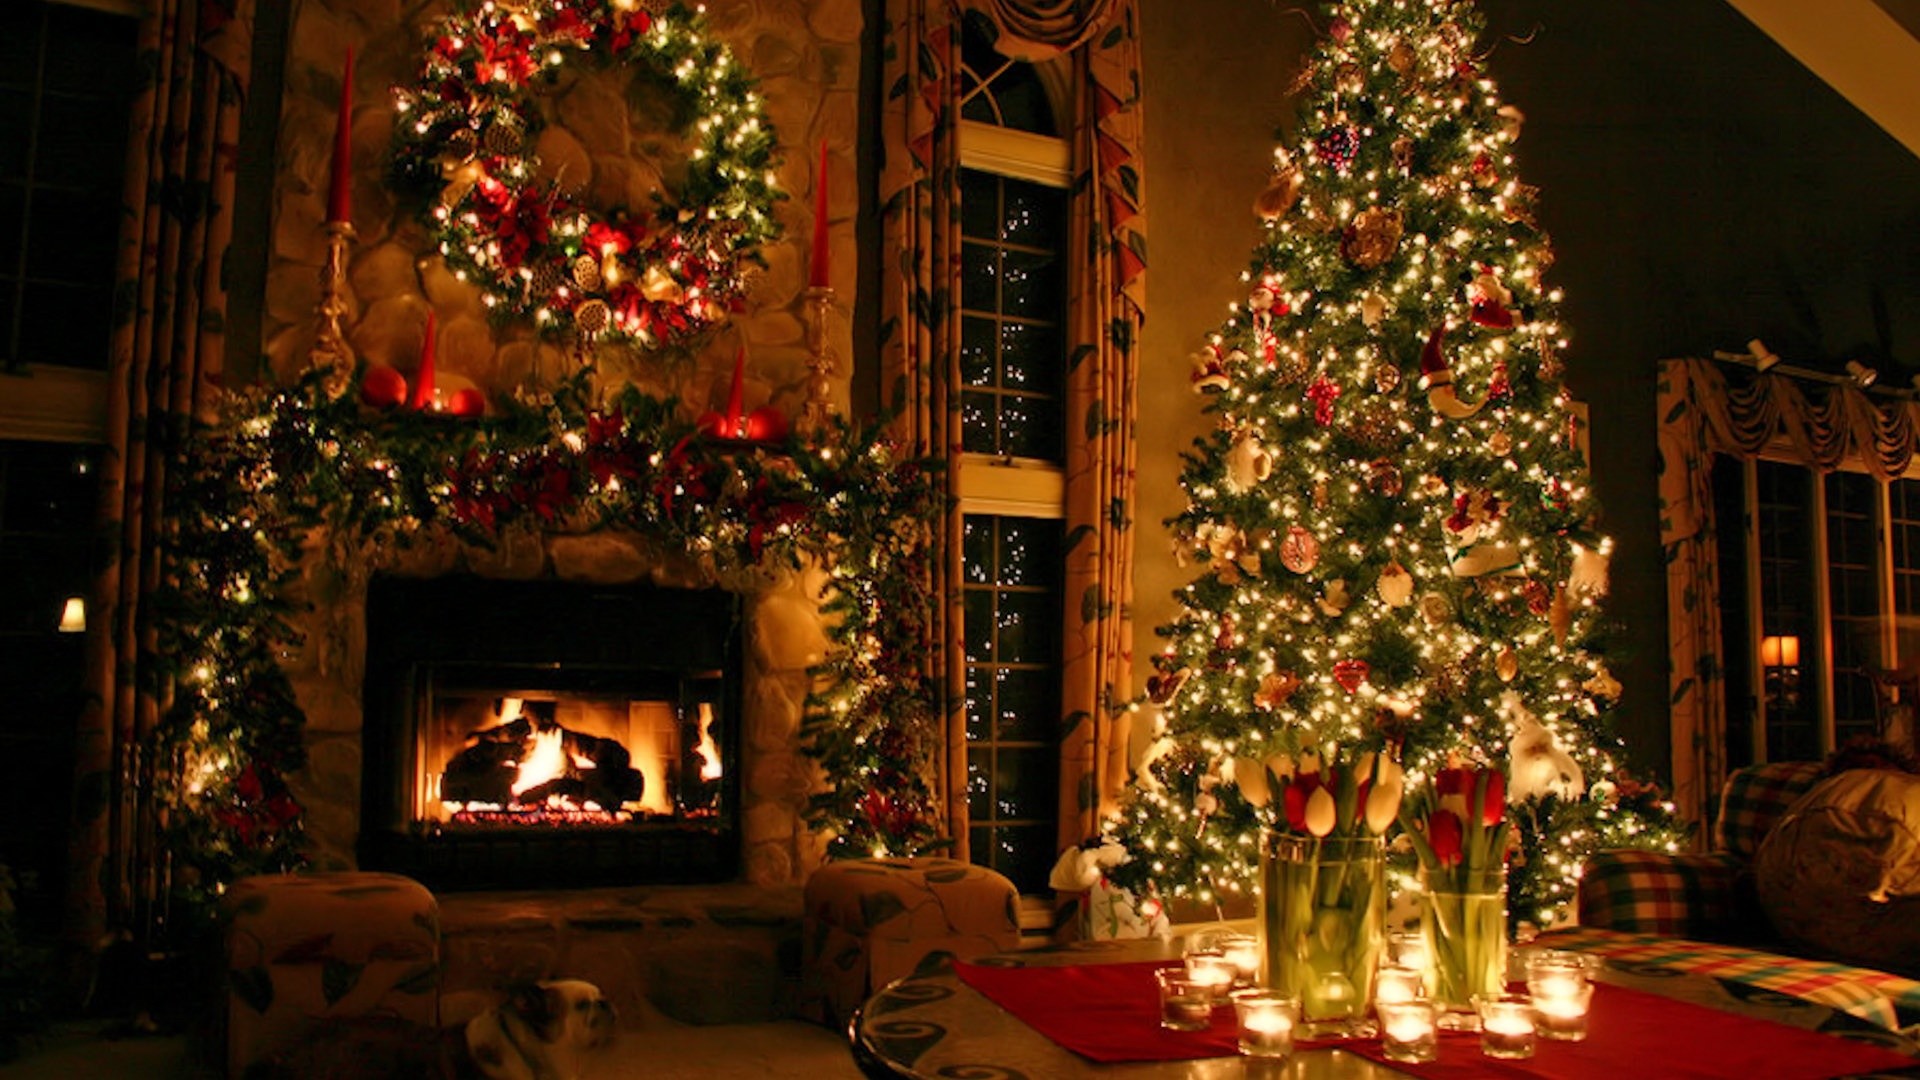 1920x1080 2015 Christmas backgrounds hd - wallpapers, images, photos .